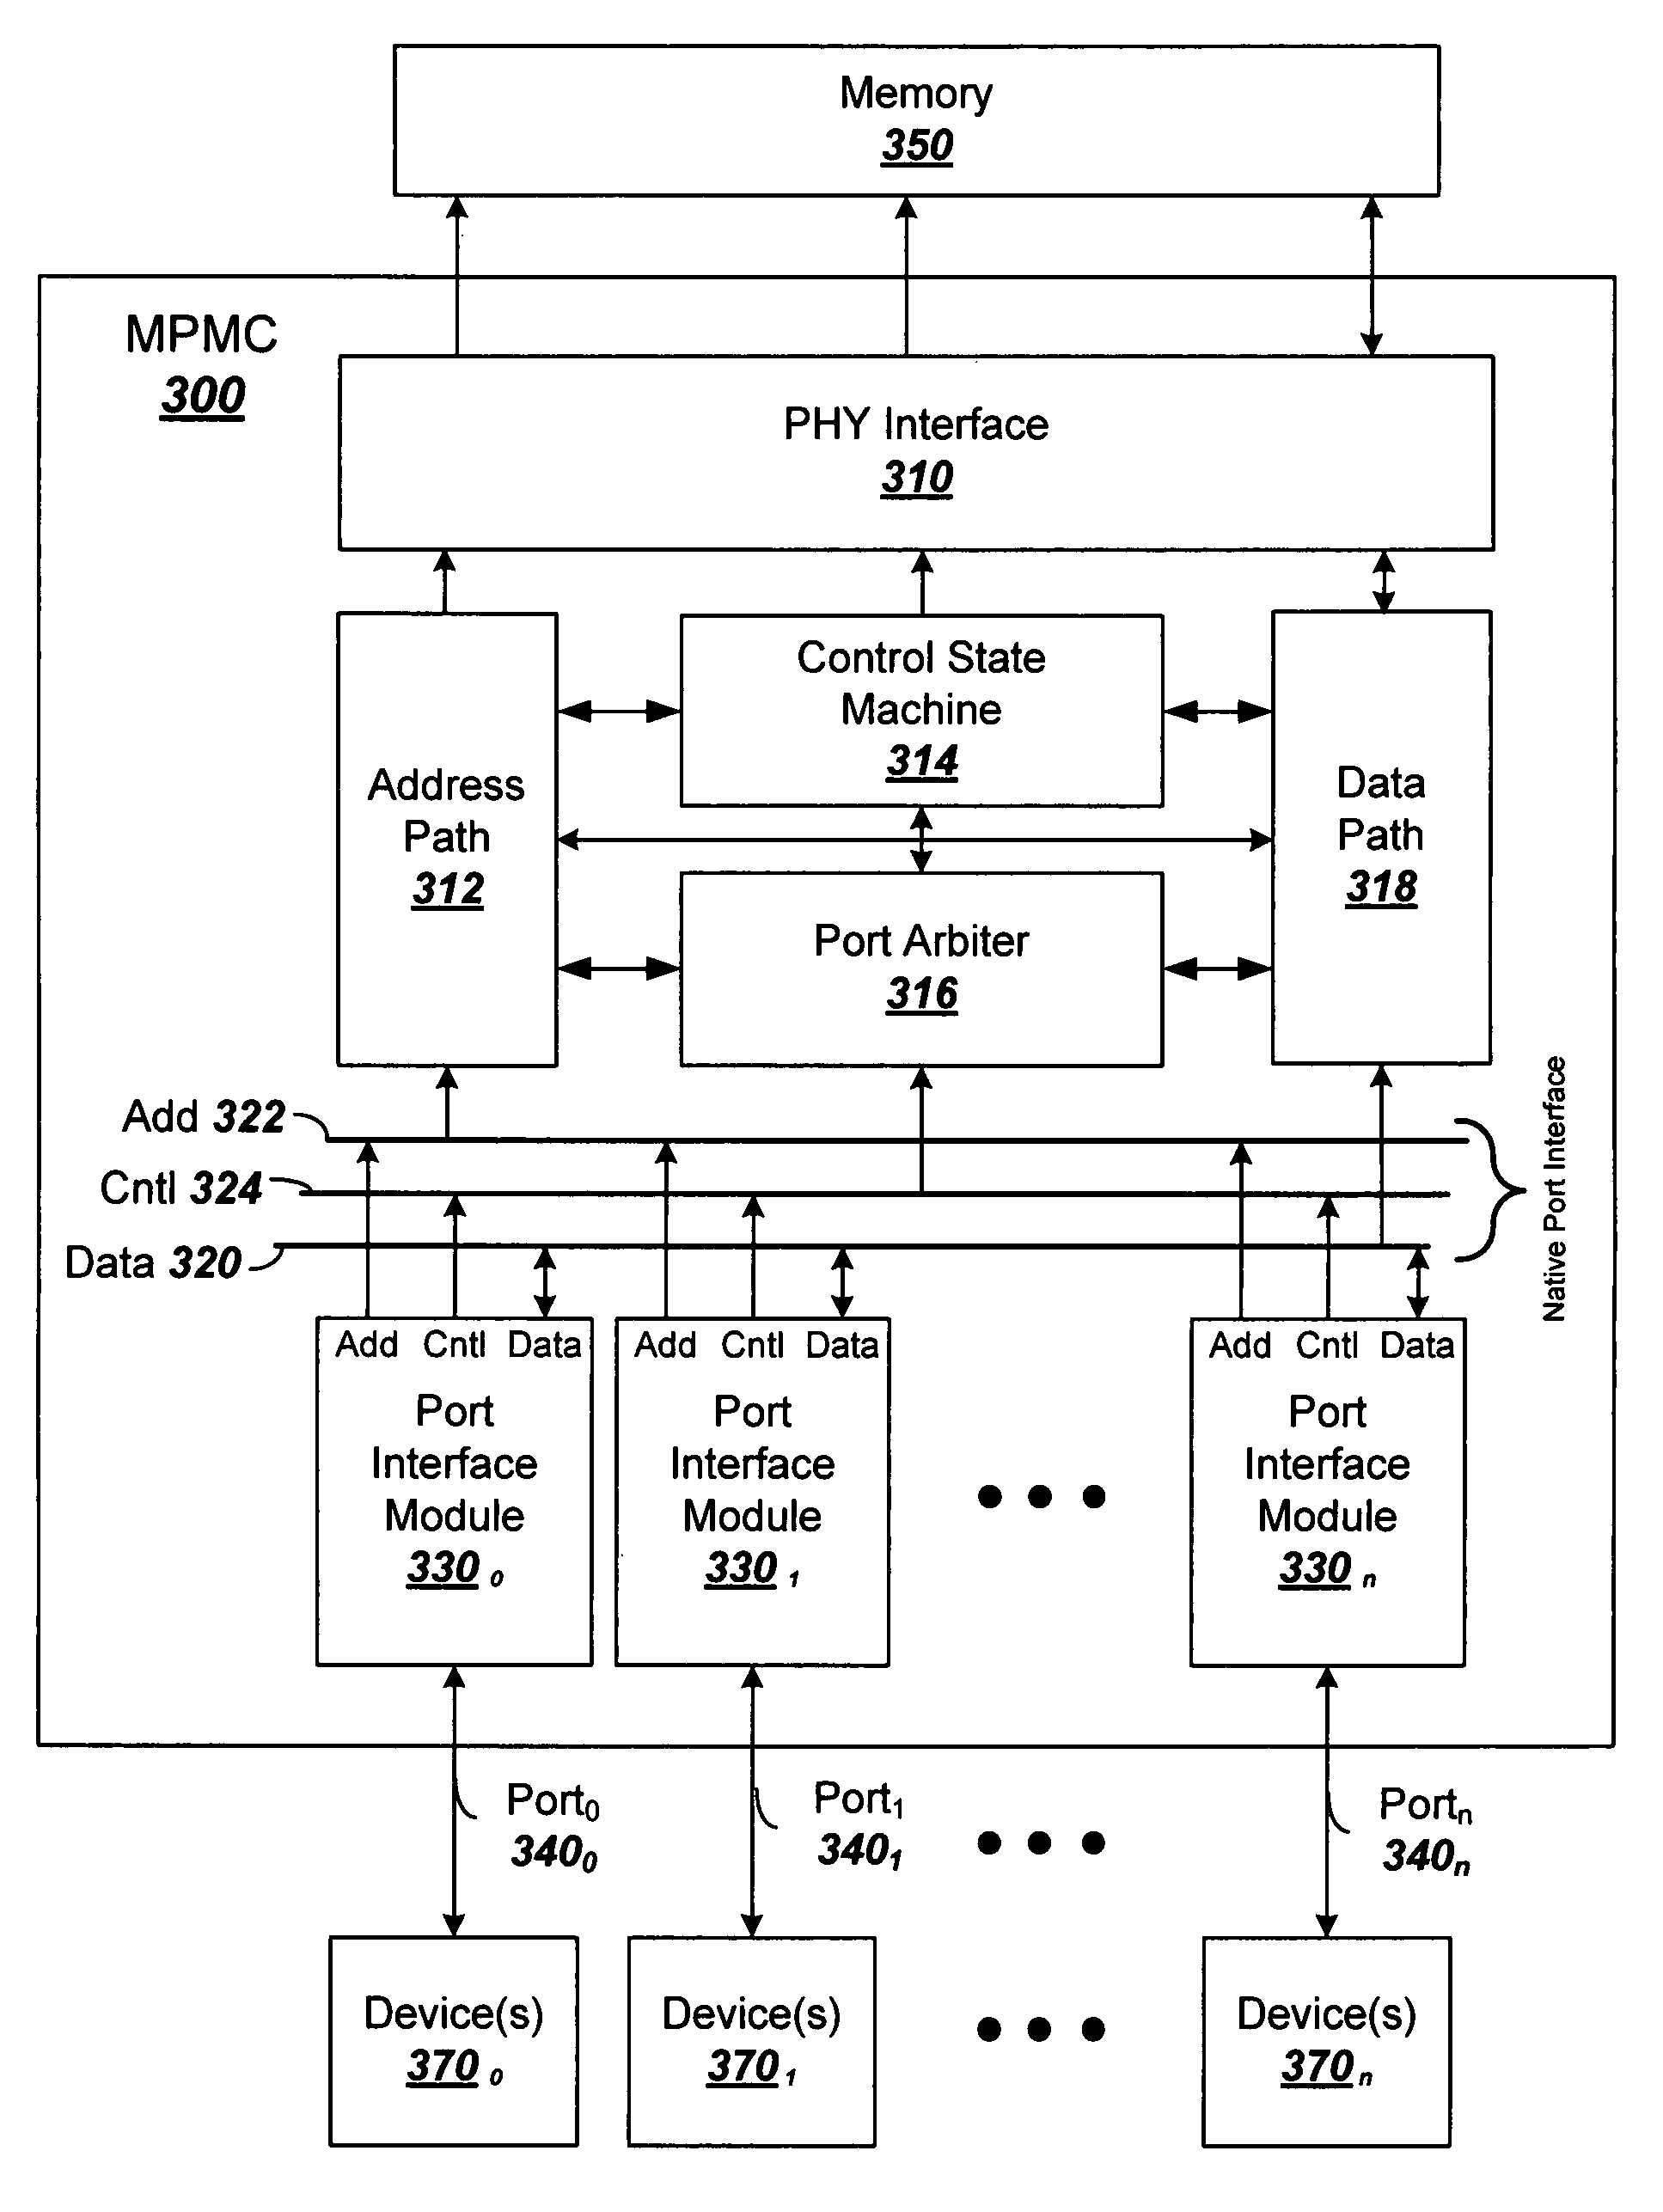 Port interface modules (PIMs) in a multi-port memory controller (MPMC)